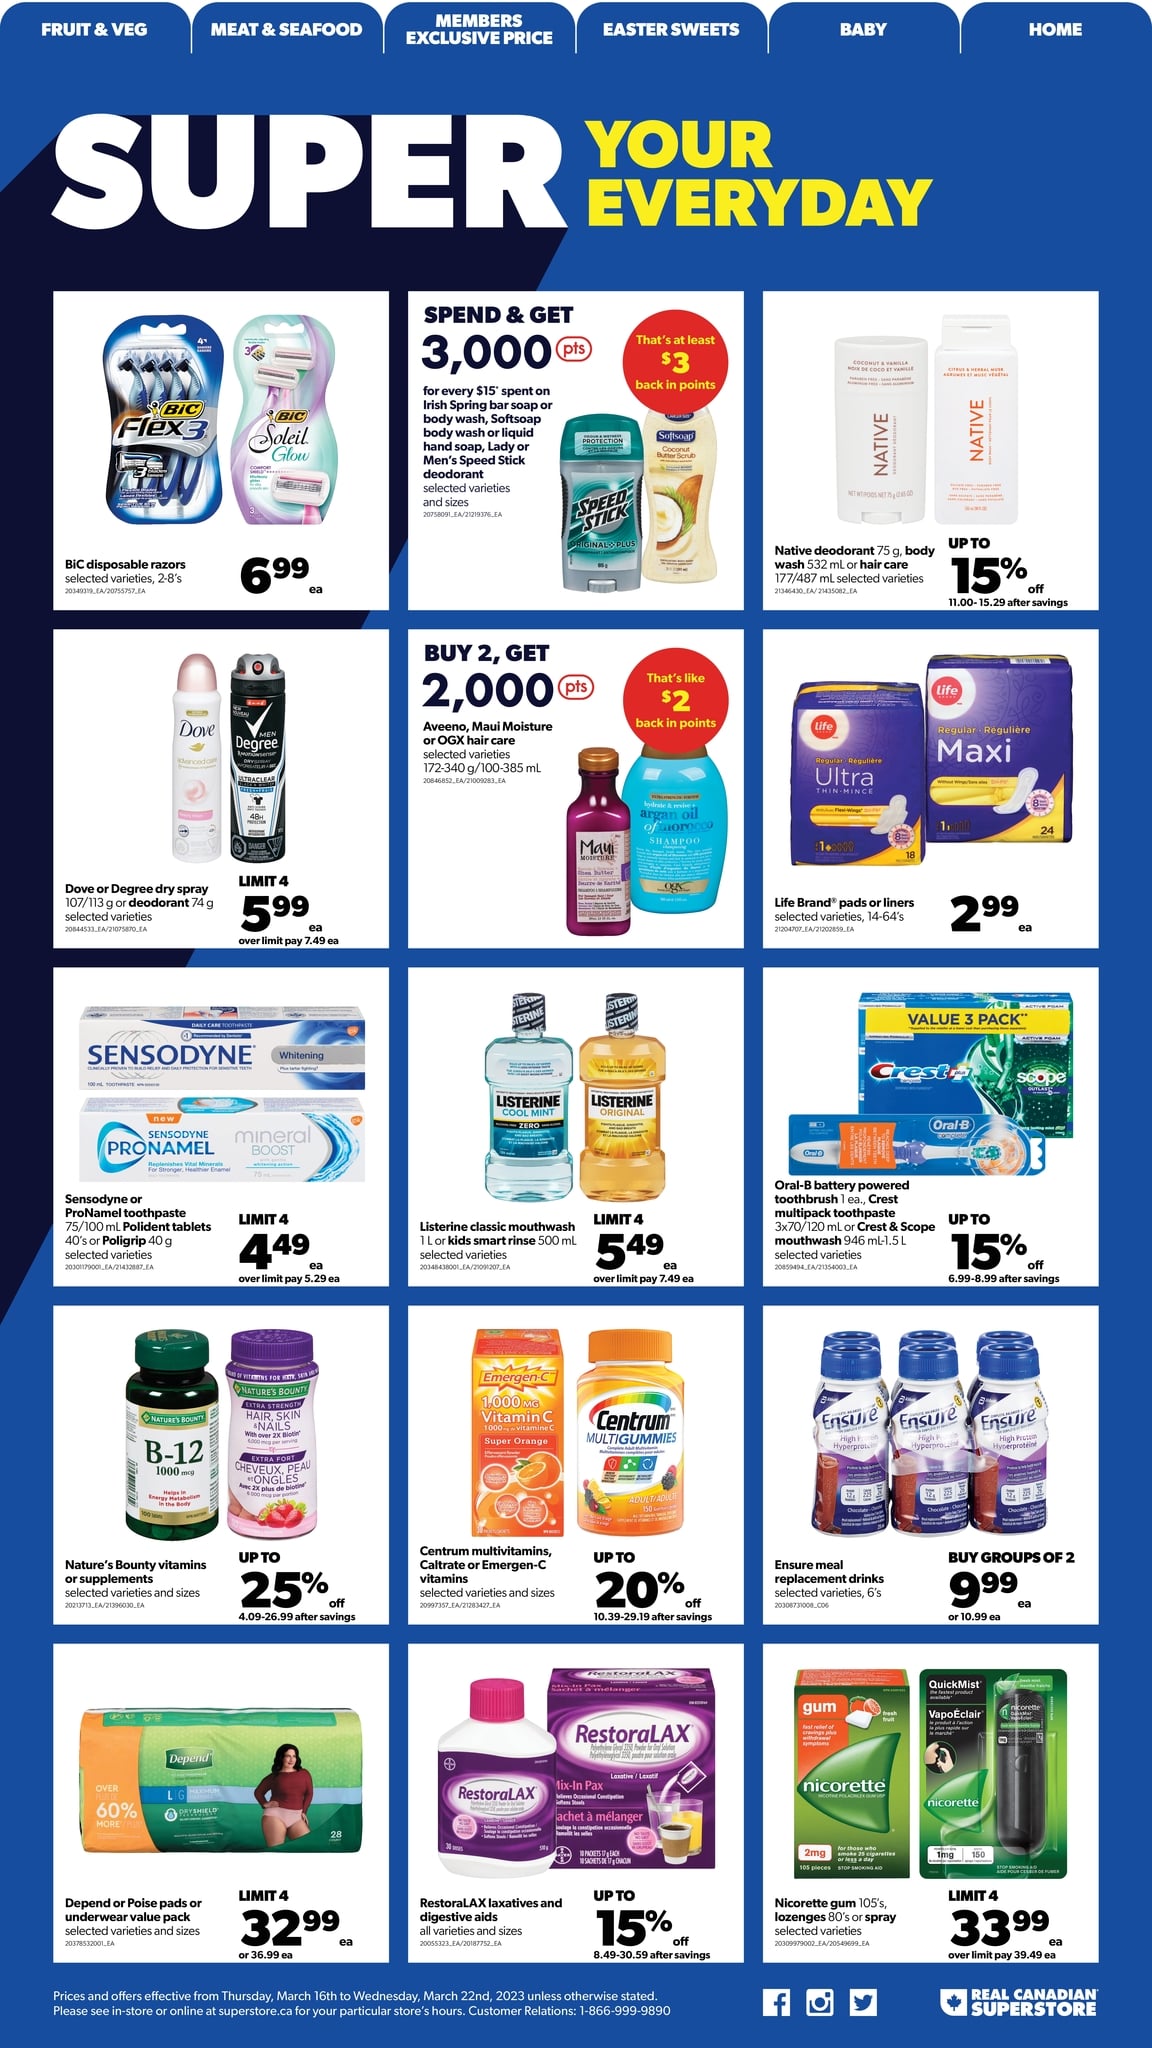 Real Canadian Superstore - Western Canada - Weekly Flyer Specials - Page 16